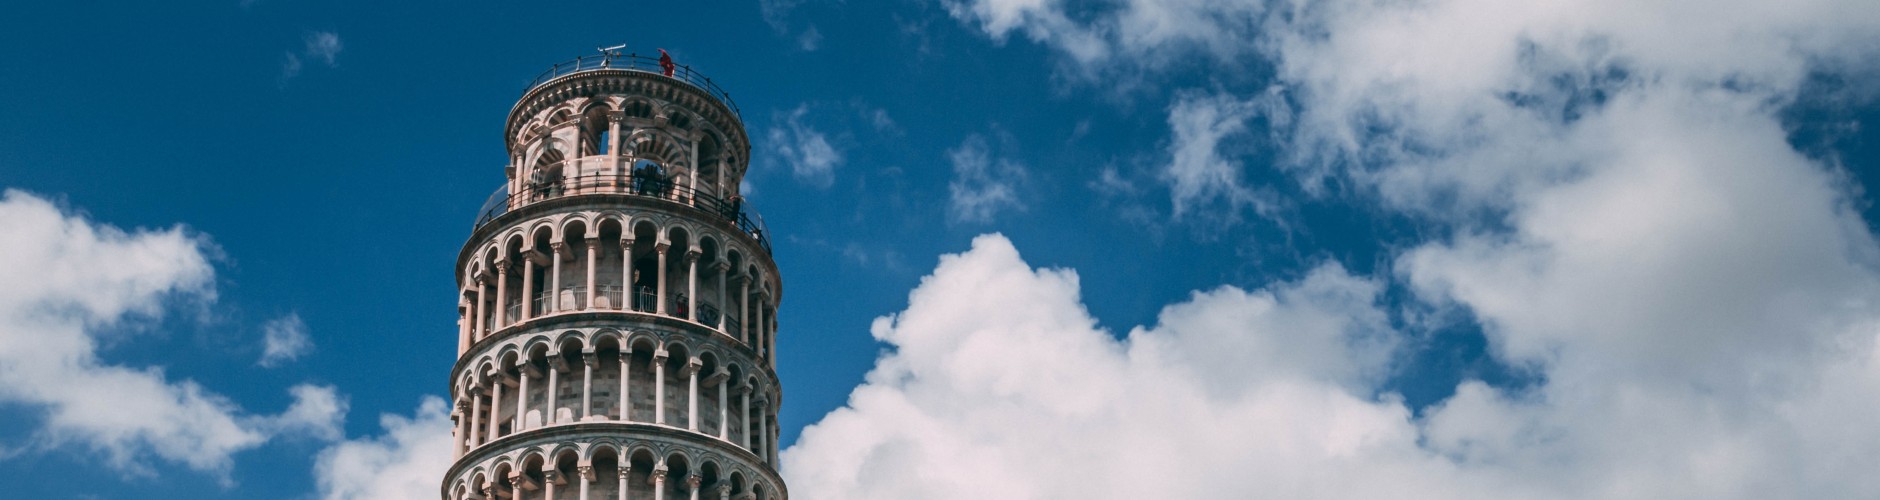 Top view of leaning tower of pisa